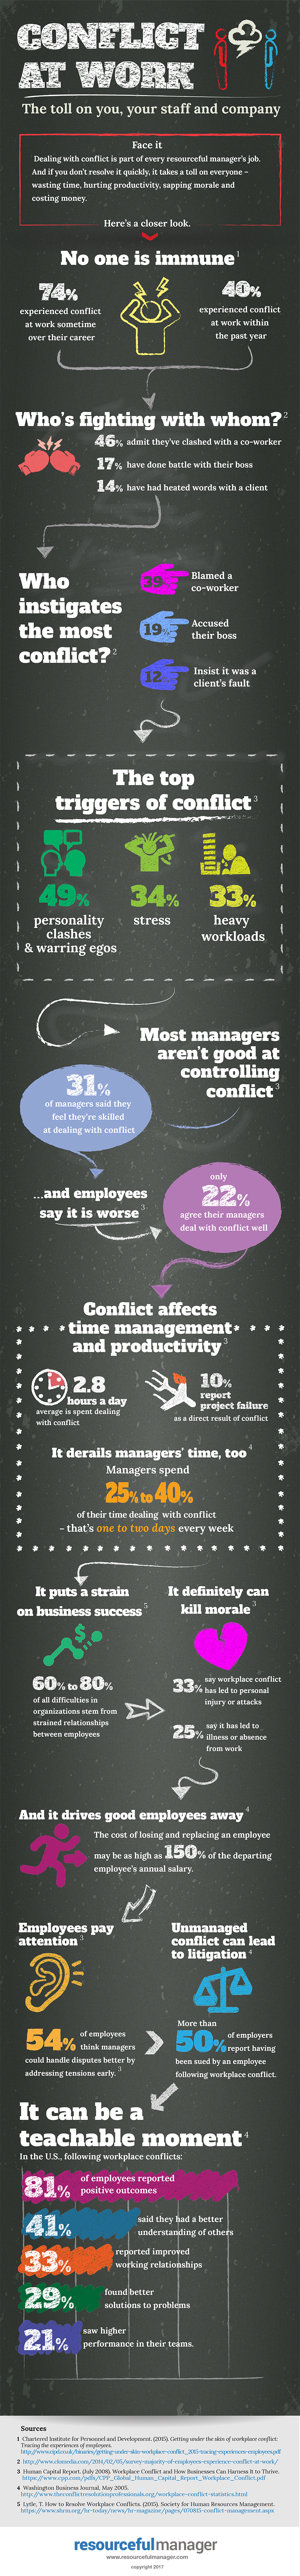 Conflict at Work infographic